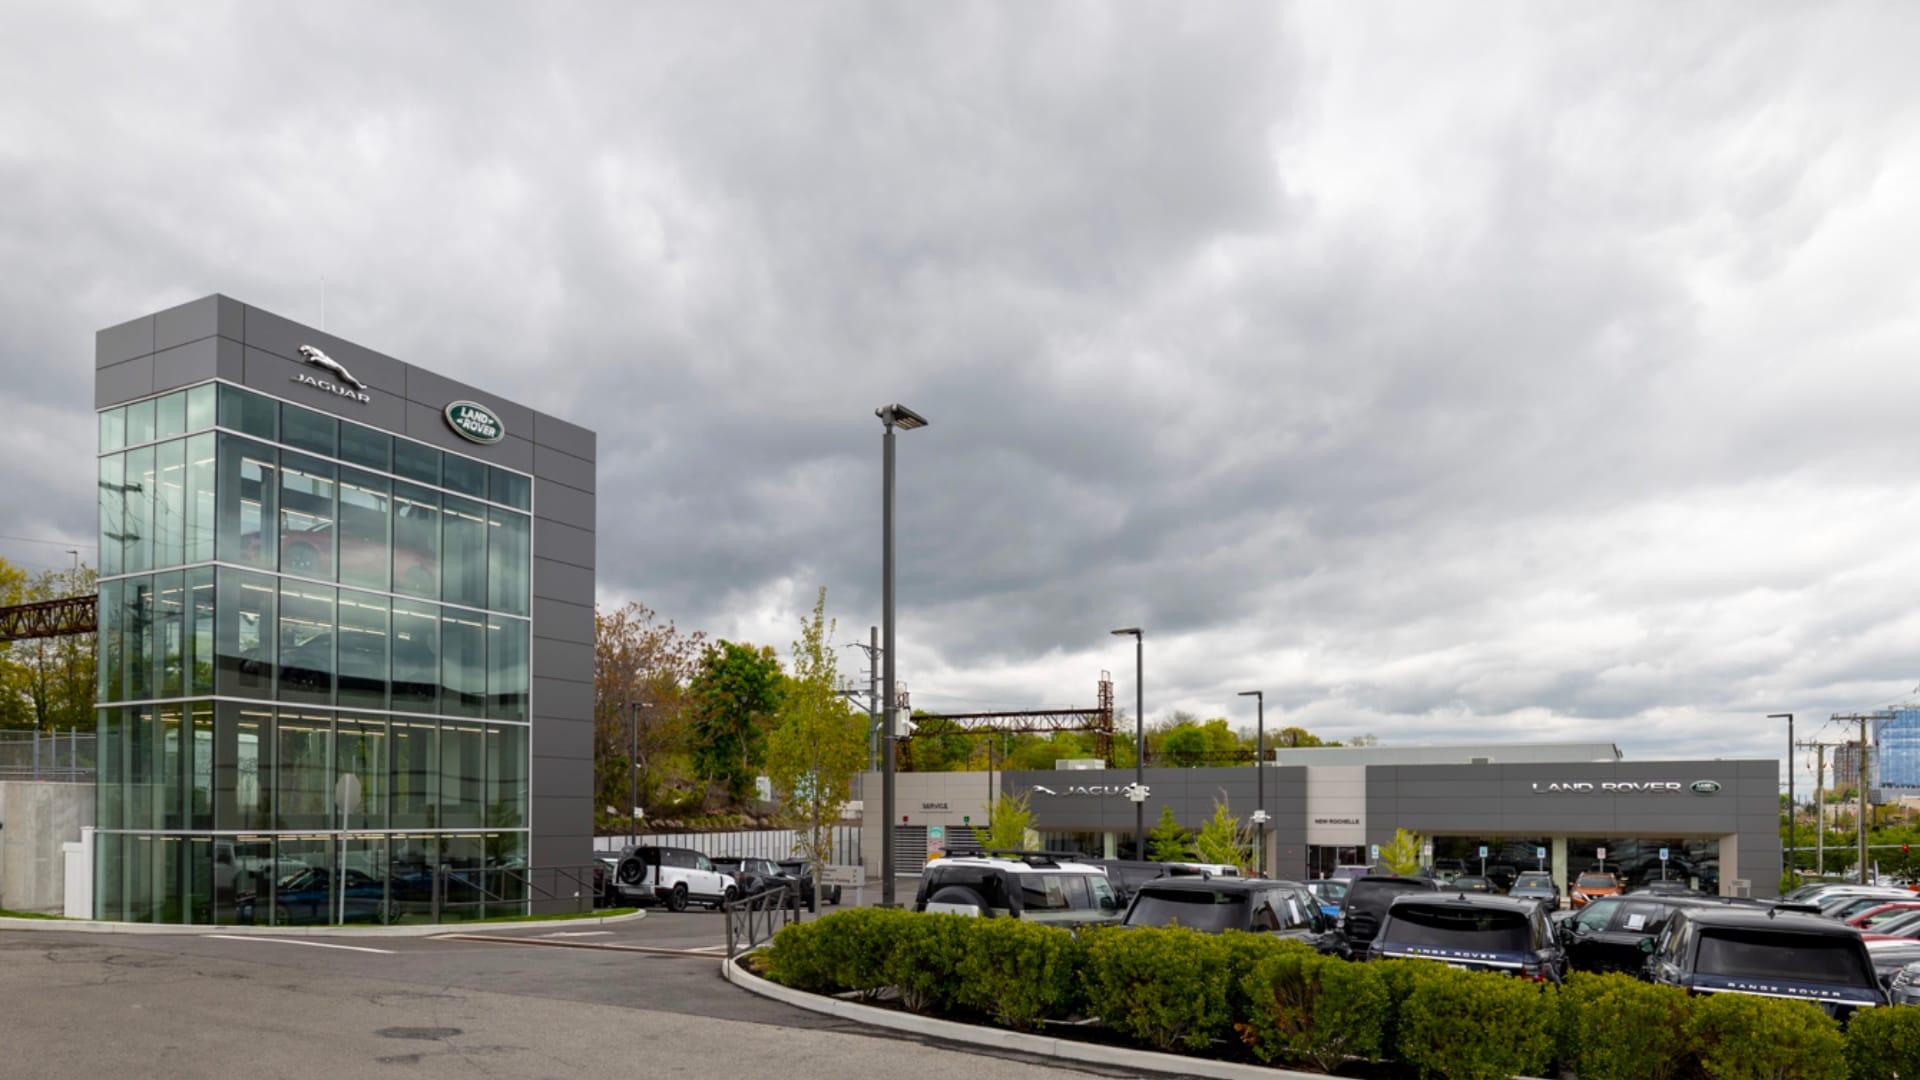 Grey Land Rover New Rochelle dealership building with a cloudy sky in the background. Vehicles can be seen through the large glass windows in a multi story display structure on the left, and the dealership building is visible on the right with many vehicles in the lot surrounding it.